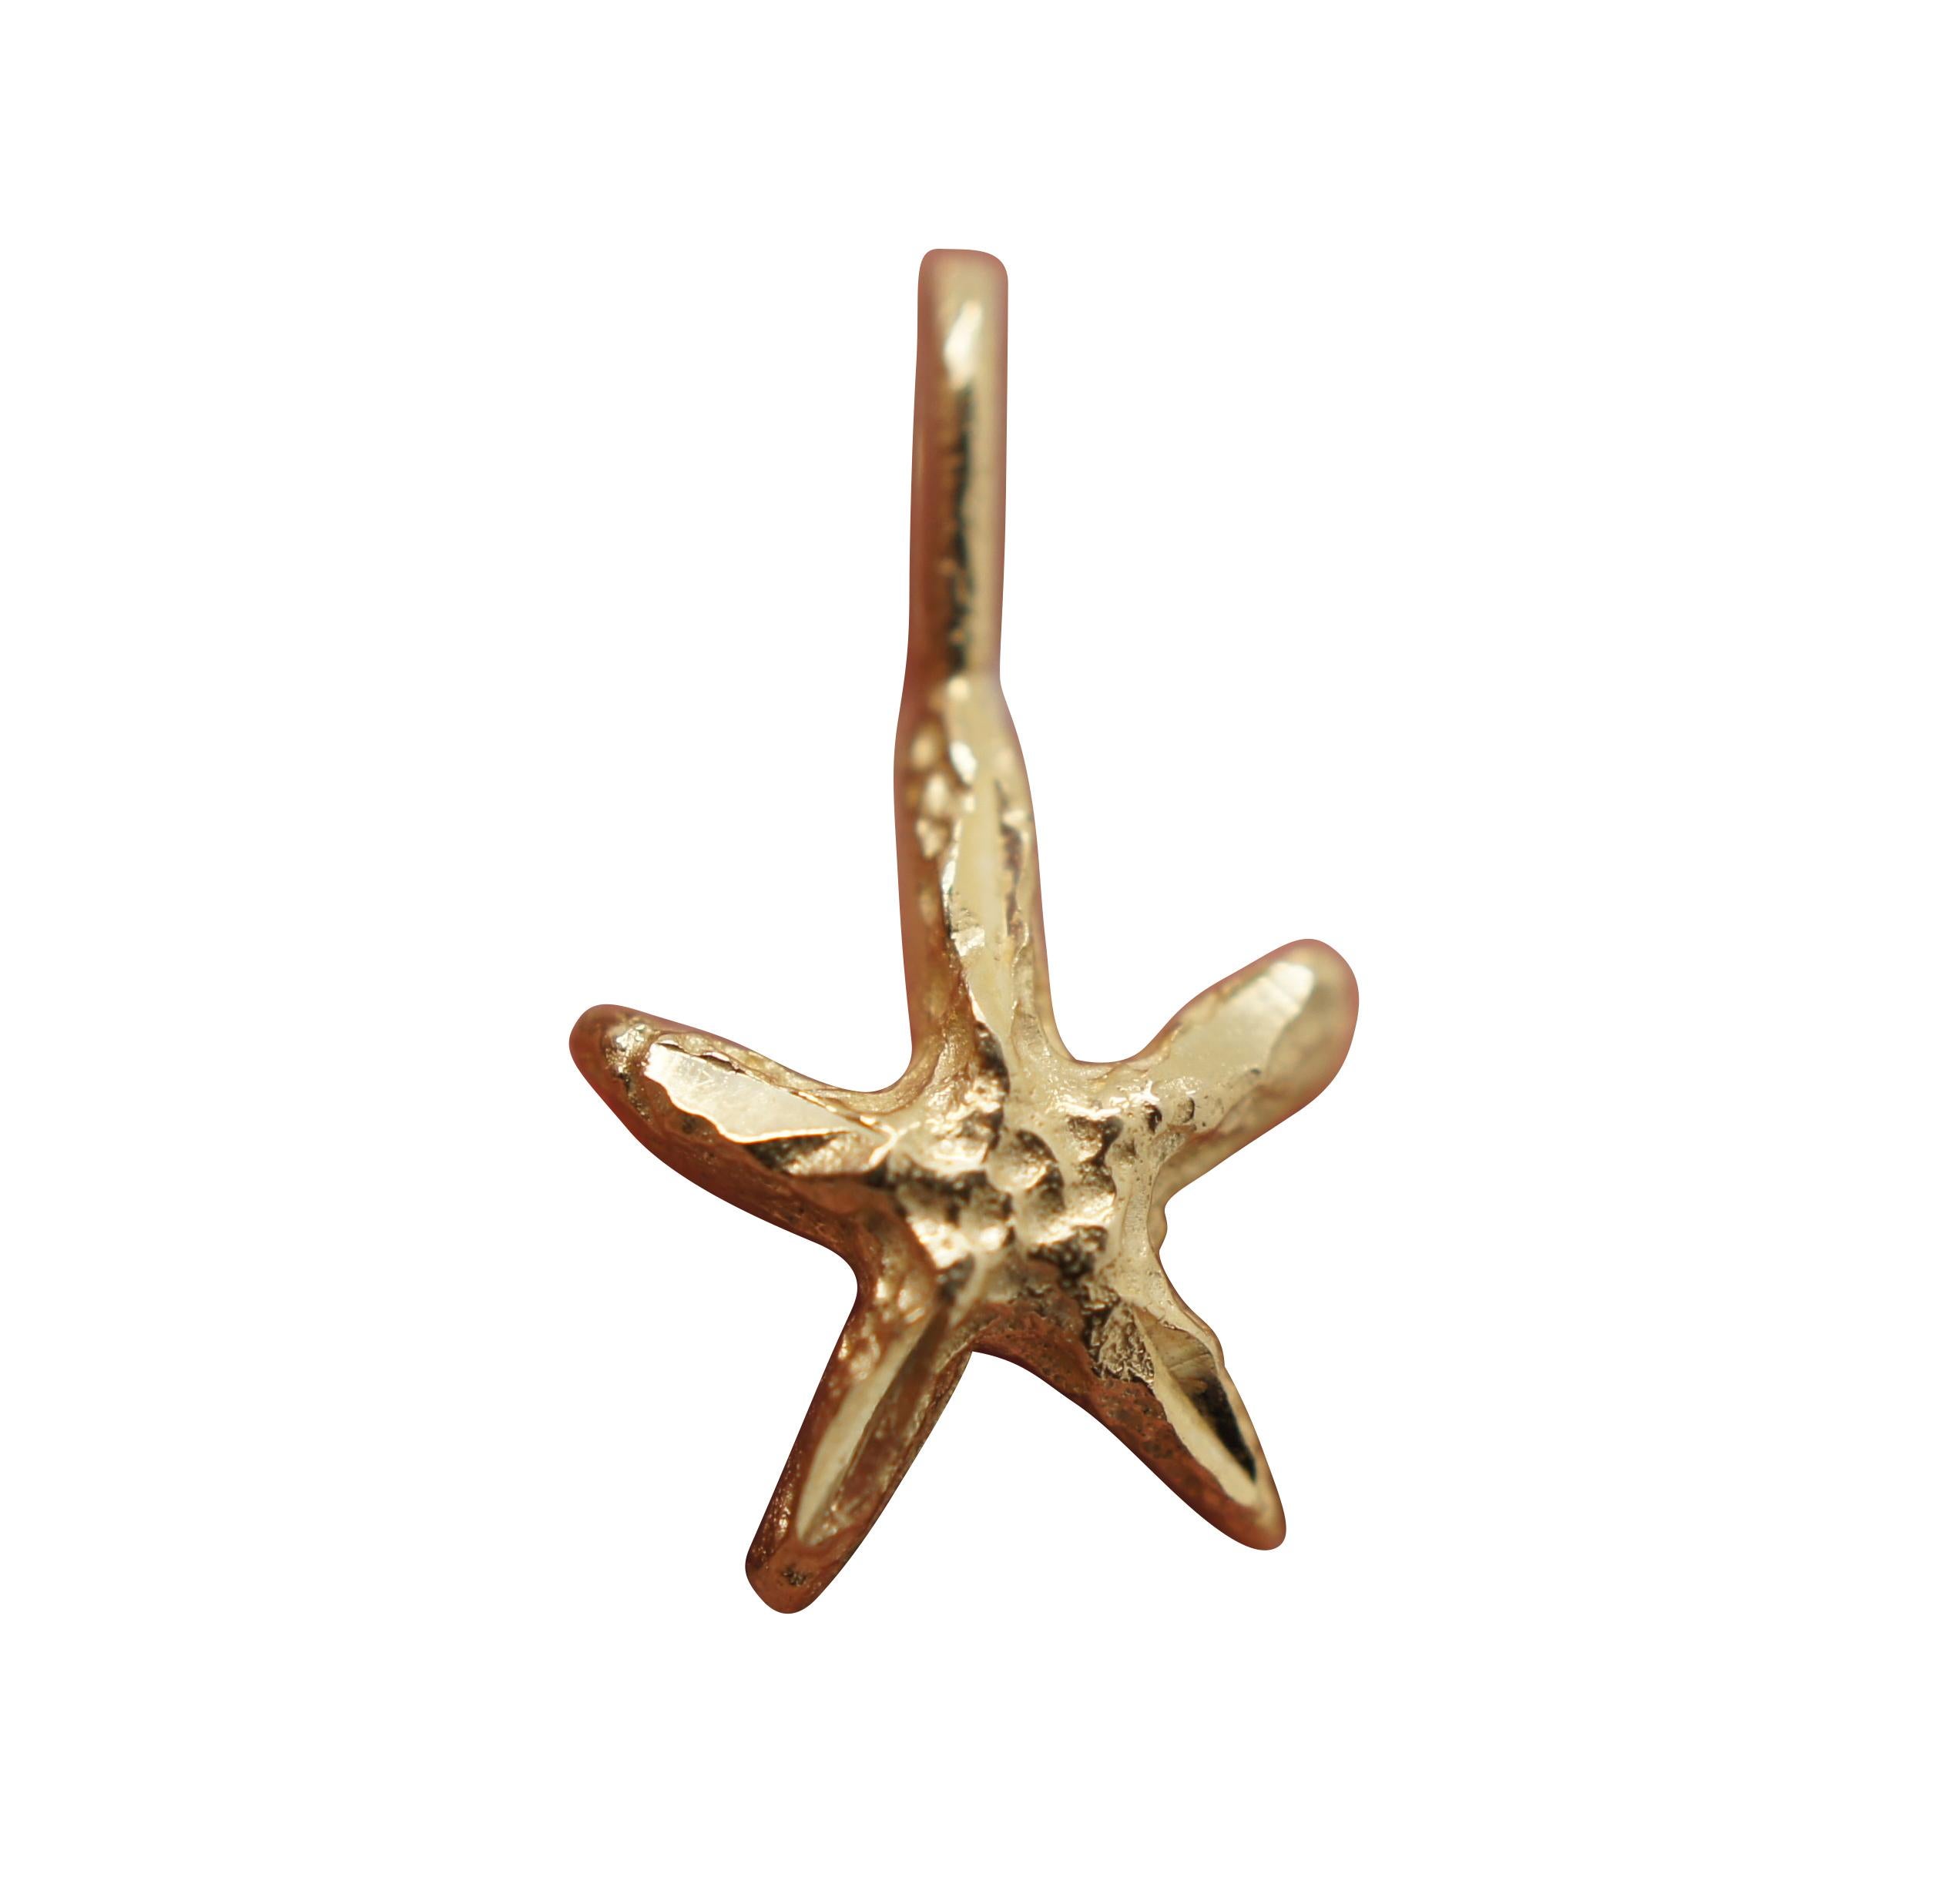 Lot of seven 14K yellow gold charms including a script letter P, puffy heart, gnarled pine tree or tree of life, snowflake, starfish, coral branch holding a pearl, and coral star set with a pearl.

Largest - 0.625” x 0.875” (Length x Width) /